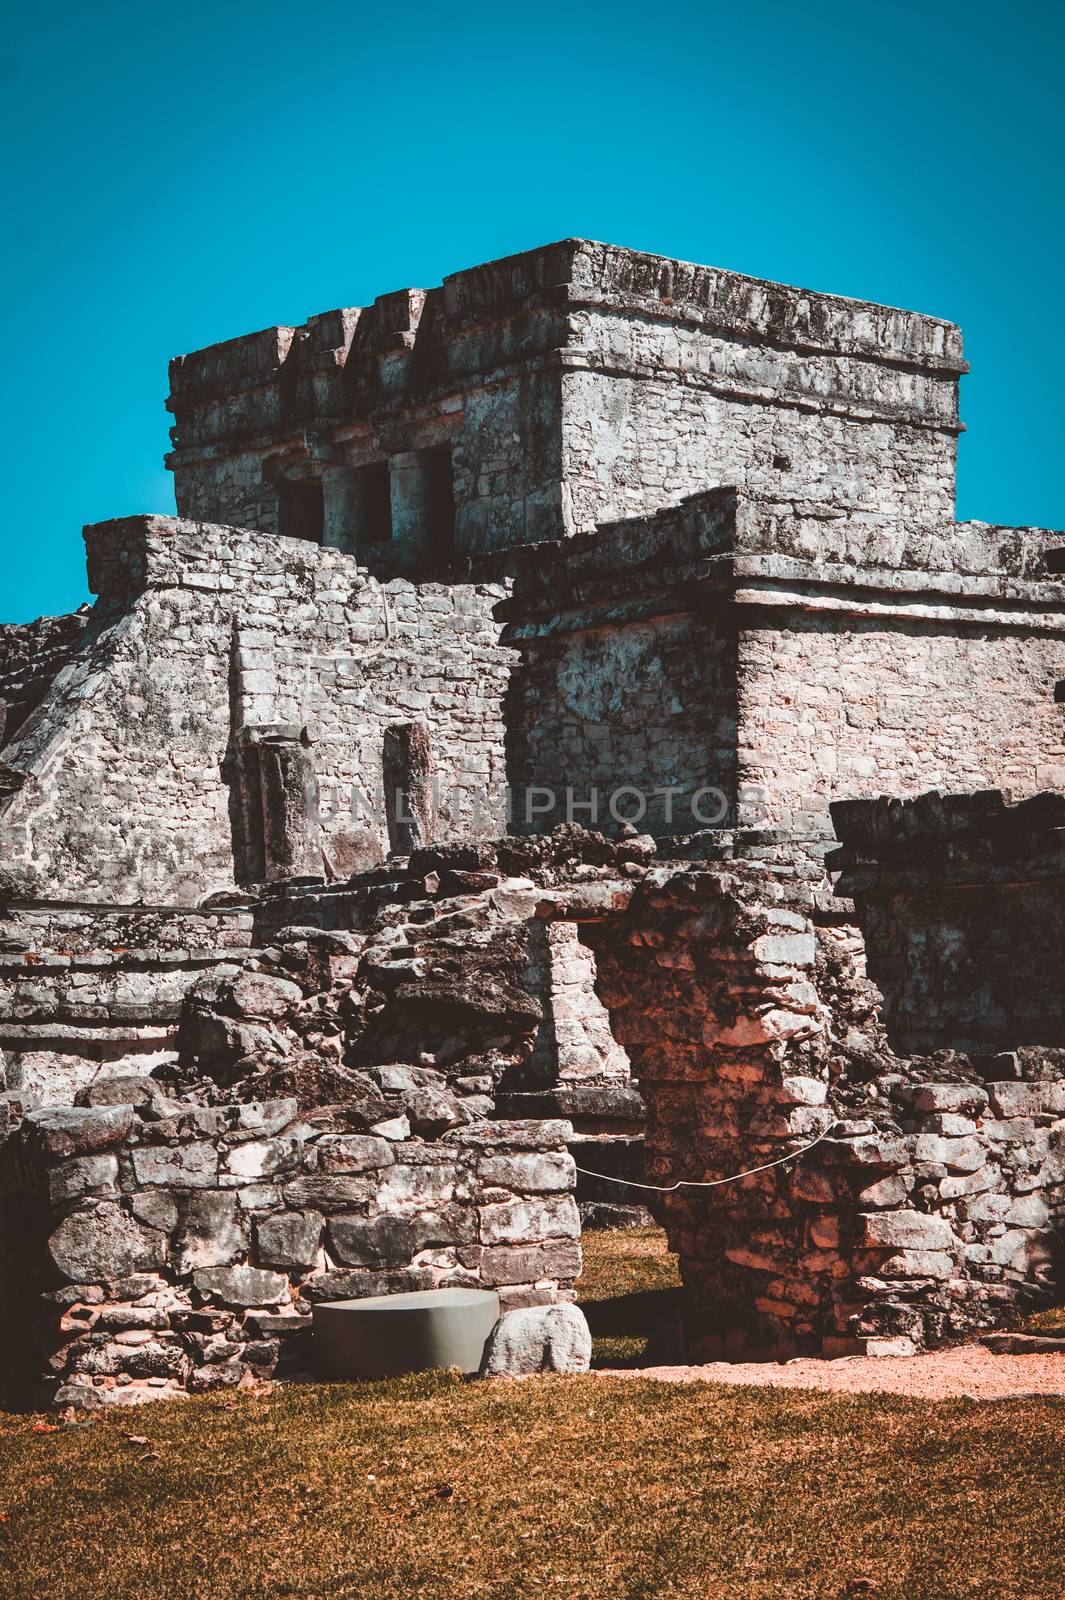 Mayan Temple of the Wind God in Tulum, Mexico by tanaonte